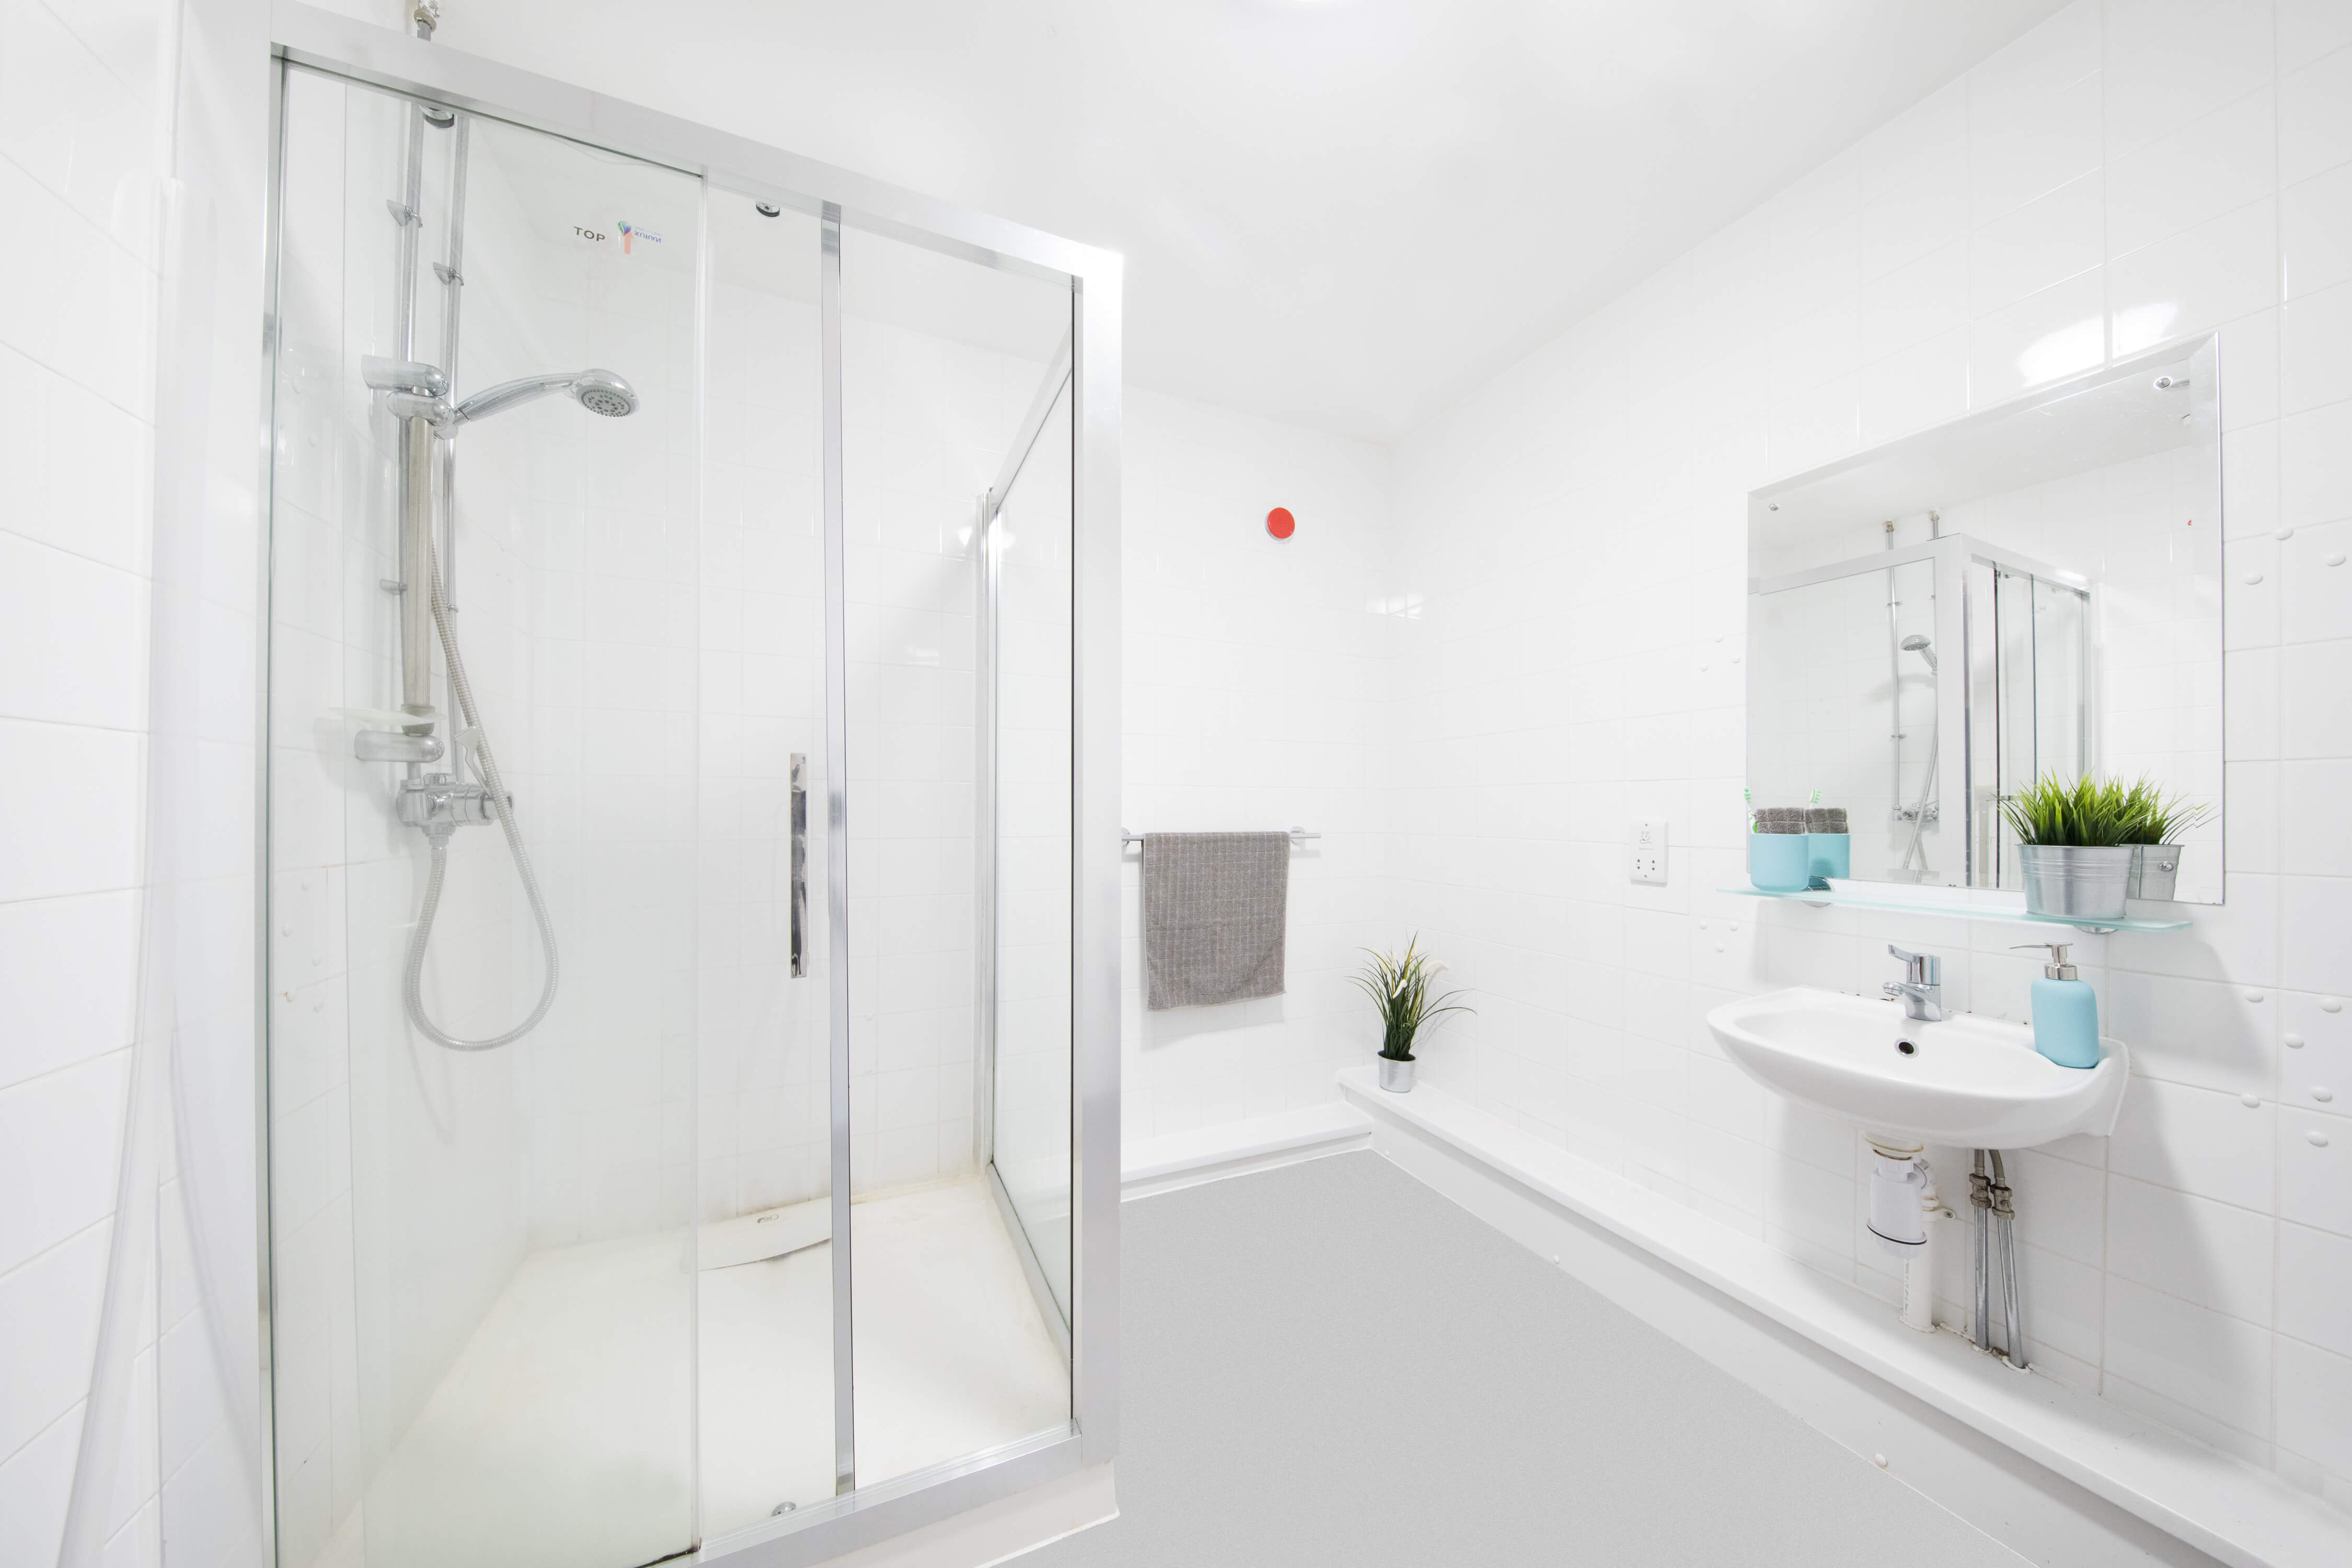 Bathroom with accessible features